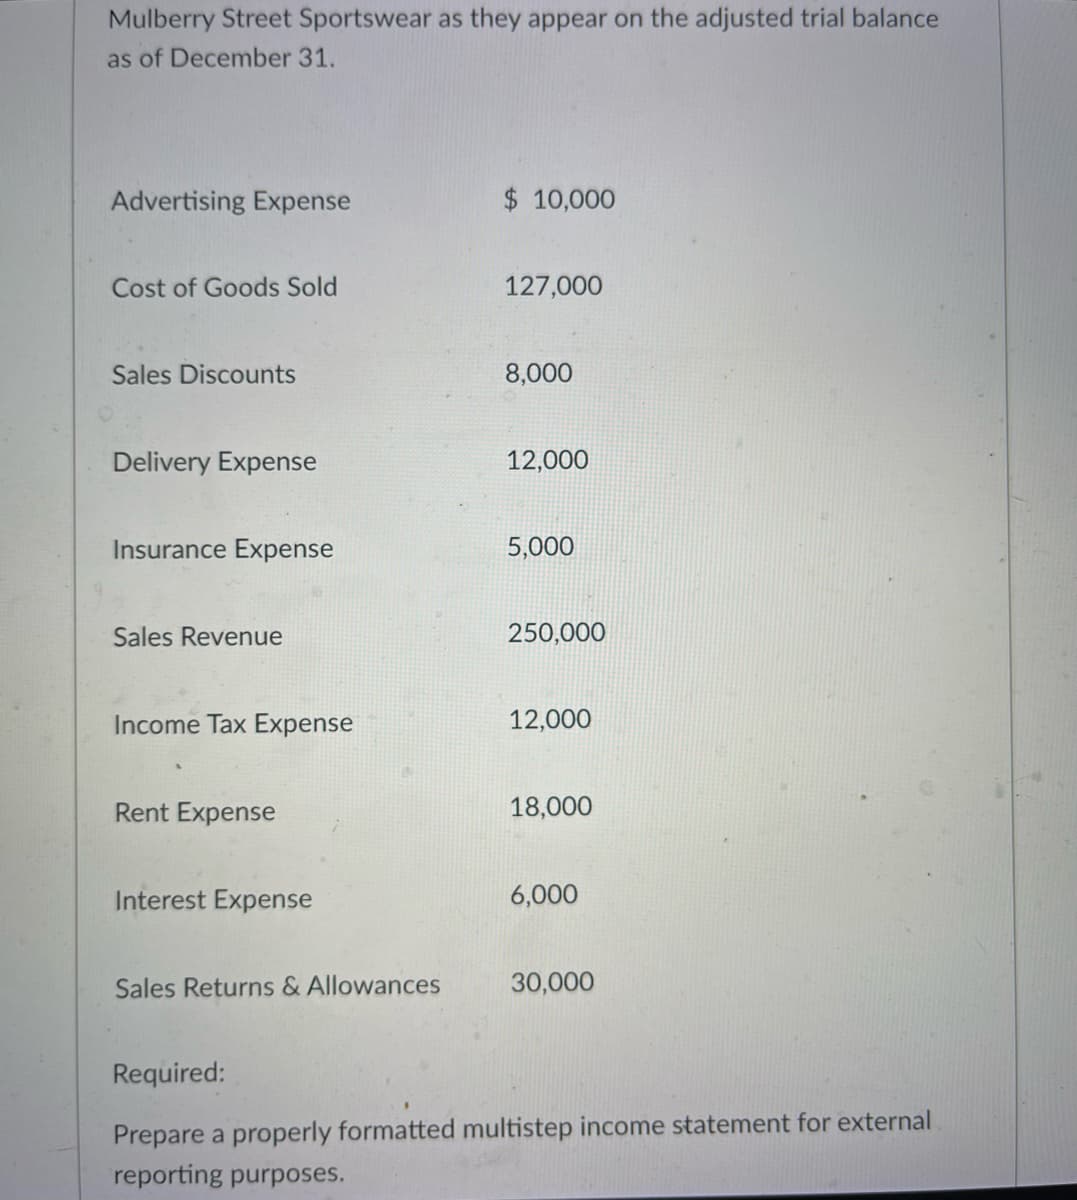 Mulberry Street Sportswear as they appear on the adjusted trial balance
as of December 31.
Advertising Expense
Cost of Goods Sold
Sales Discounts
Delivery Expense
Insurance Expense
Sales Revenue
Income Tax Expense
Rent Expense
Interest Expense
Sales Returns & Allowances
$ 10,000
127,000
8,000
12,000
5,000
250,000
12,000
18,000
6,000
30,000
Required:
Prepare a properly formatted multistep income statement for external
reporting purposes.